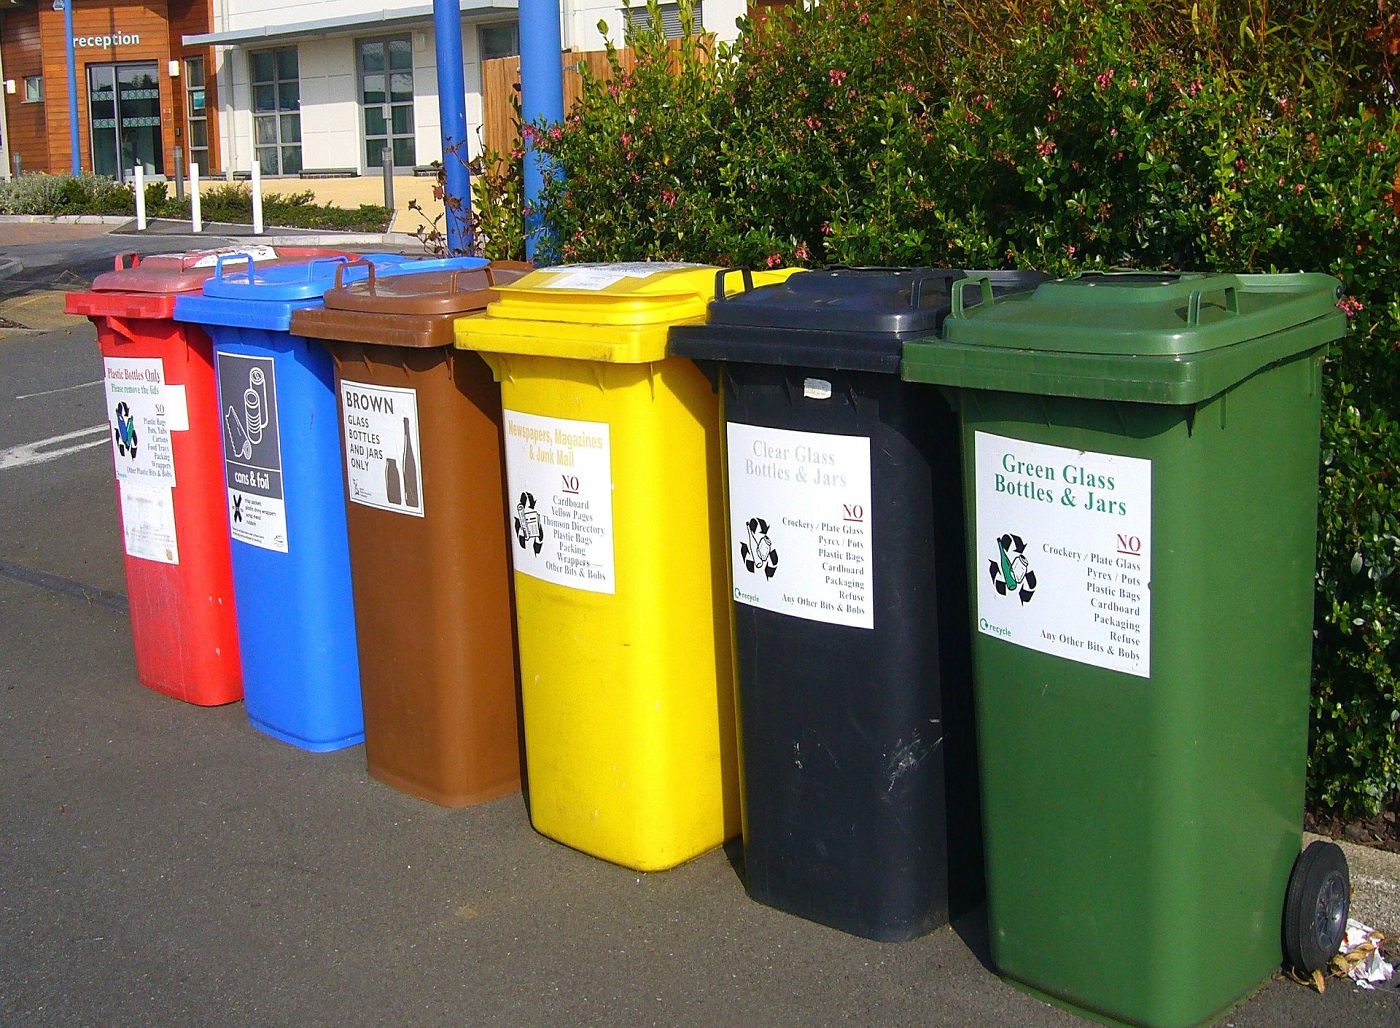 Six recycle bins in front of building - Construction recycling